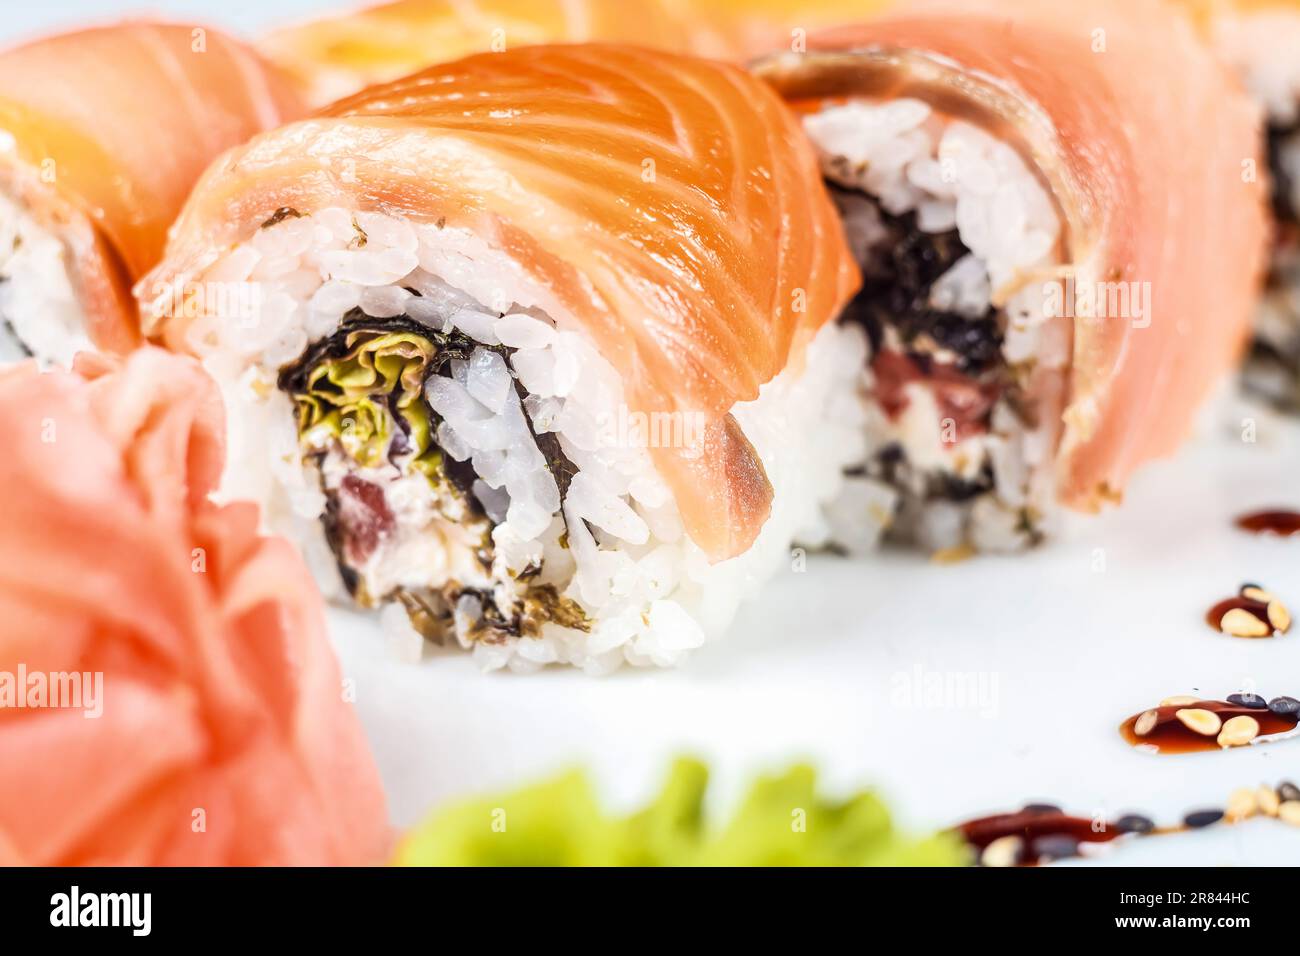 Fresh and flavorful Asian food, such as the California Roll with Salmon and Rice, awaits your taste buds! Stock Photo